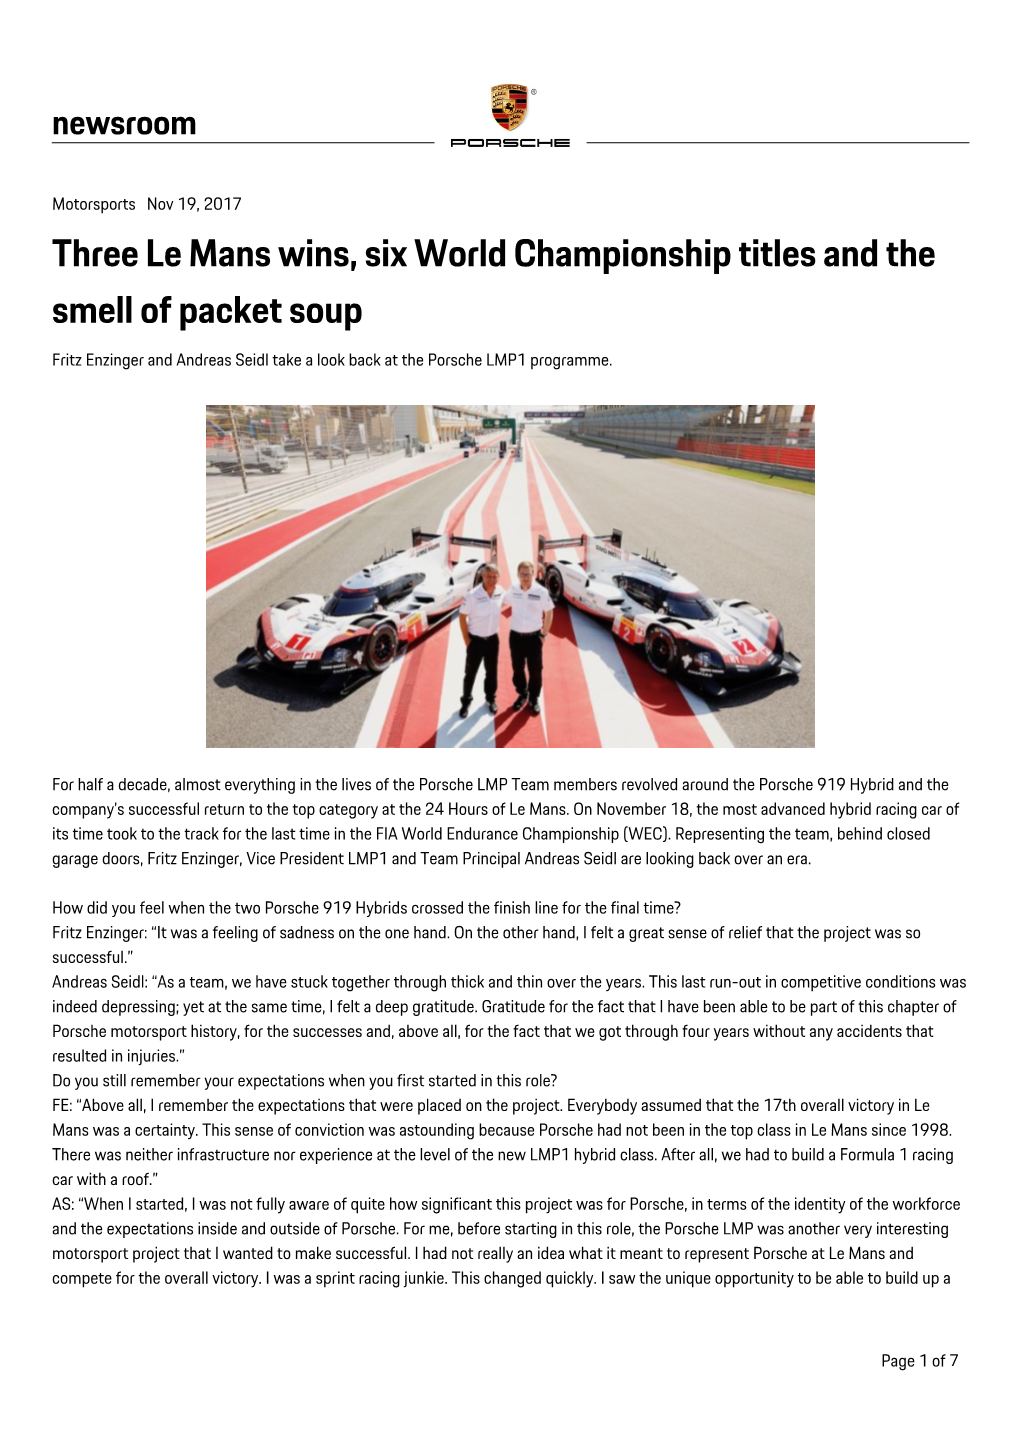 Three Le Mans Wins, Six World Championship Titles and the Smell of Packet Soup Fritz Enzinger and Andreas Seidl Take a Look Back at the Porsche LMP1 Programme